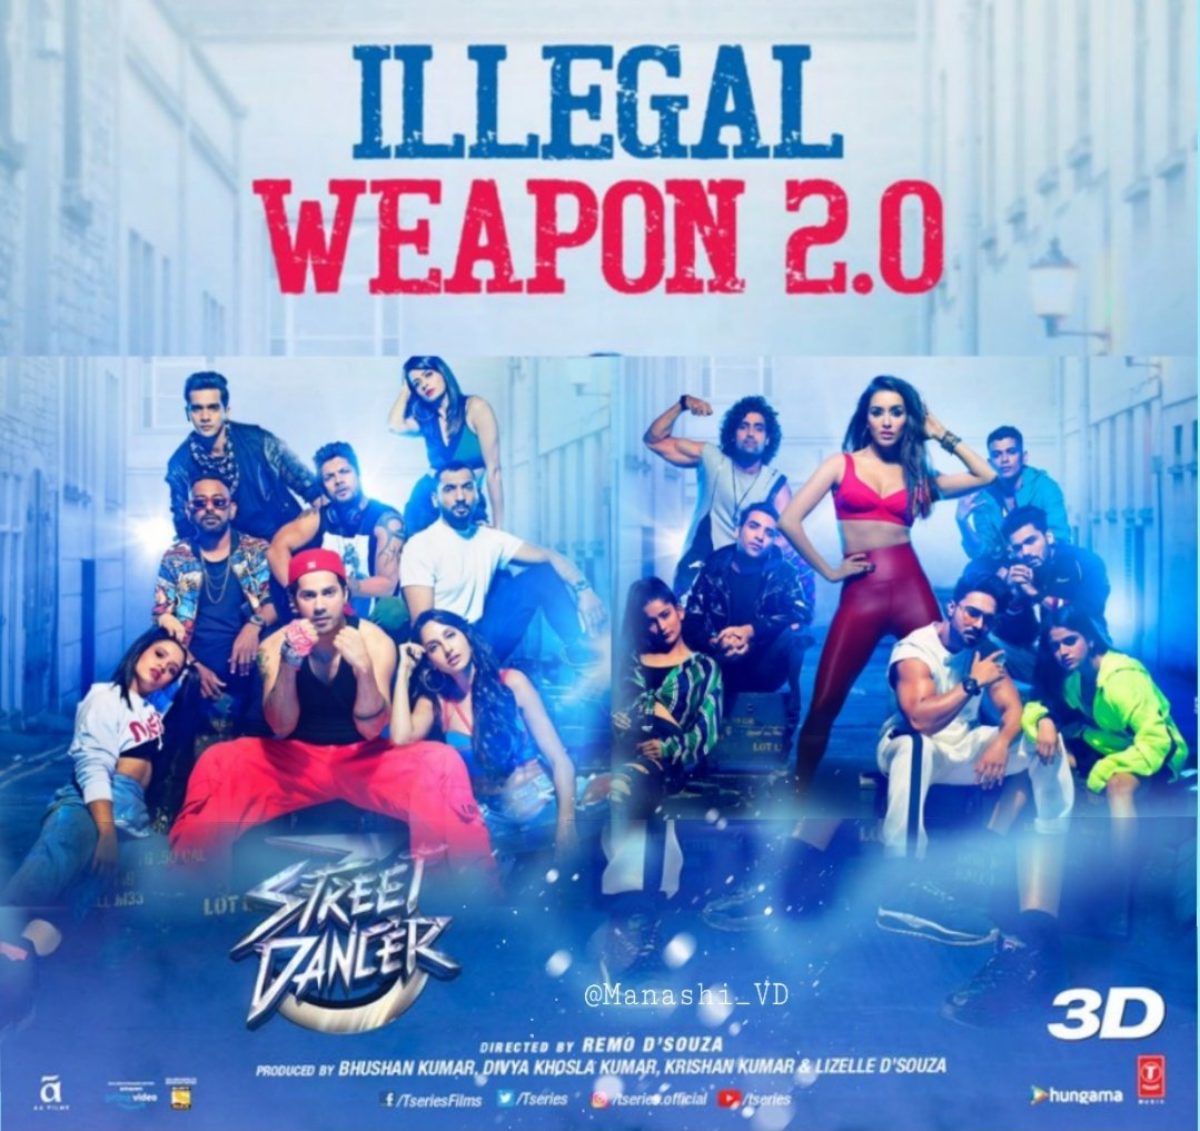 Illegal Weapon 2 0 Song Full Hd Video Get Ready The Dance Off Between Sahej Vs Inayat In Street Dancer 3d